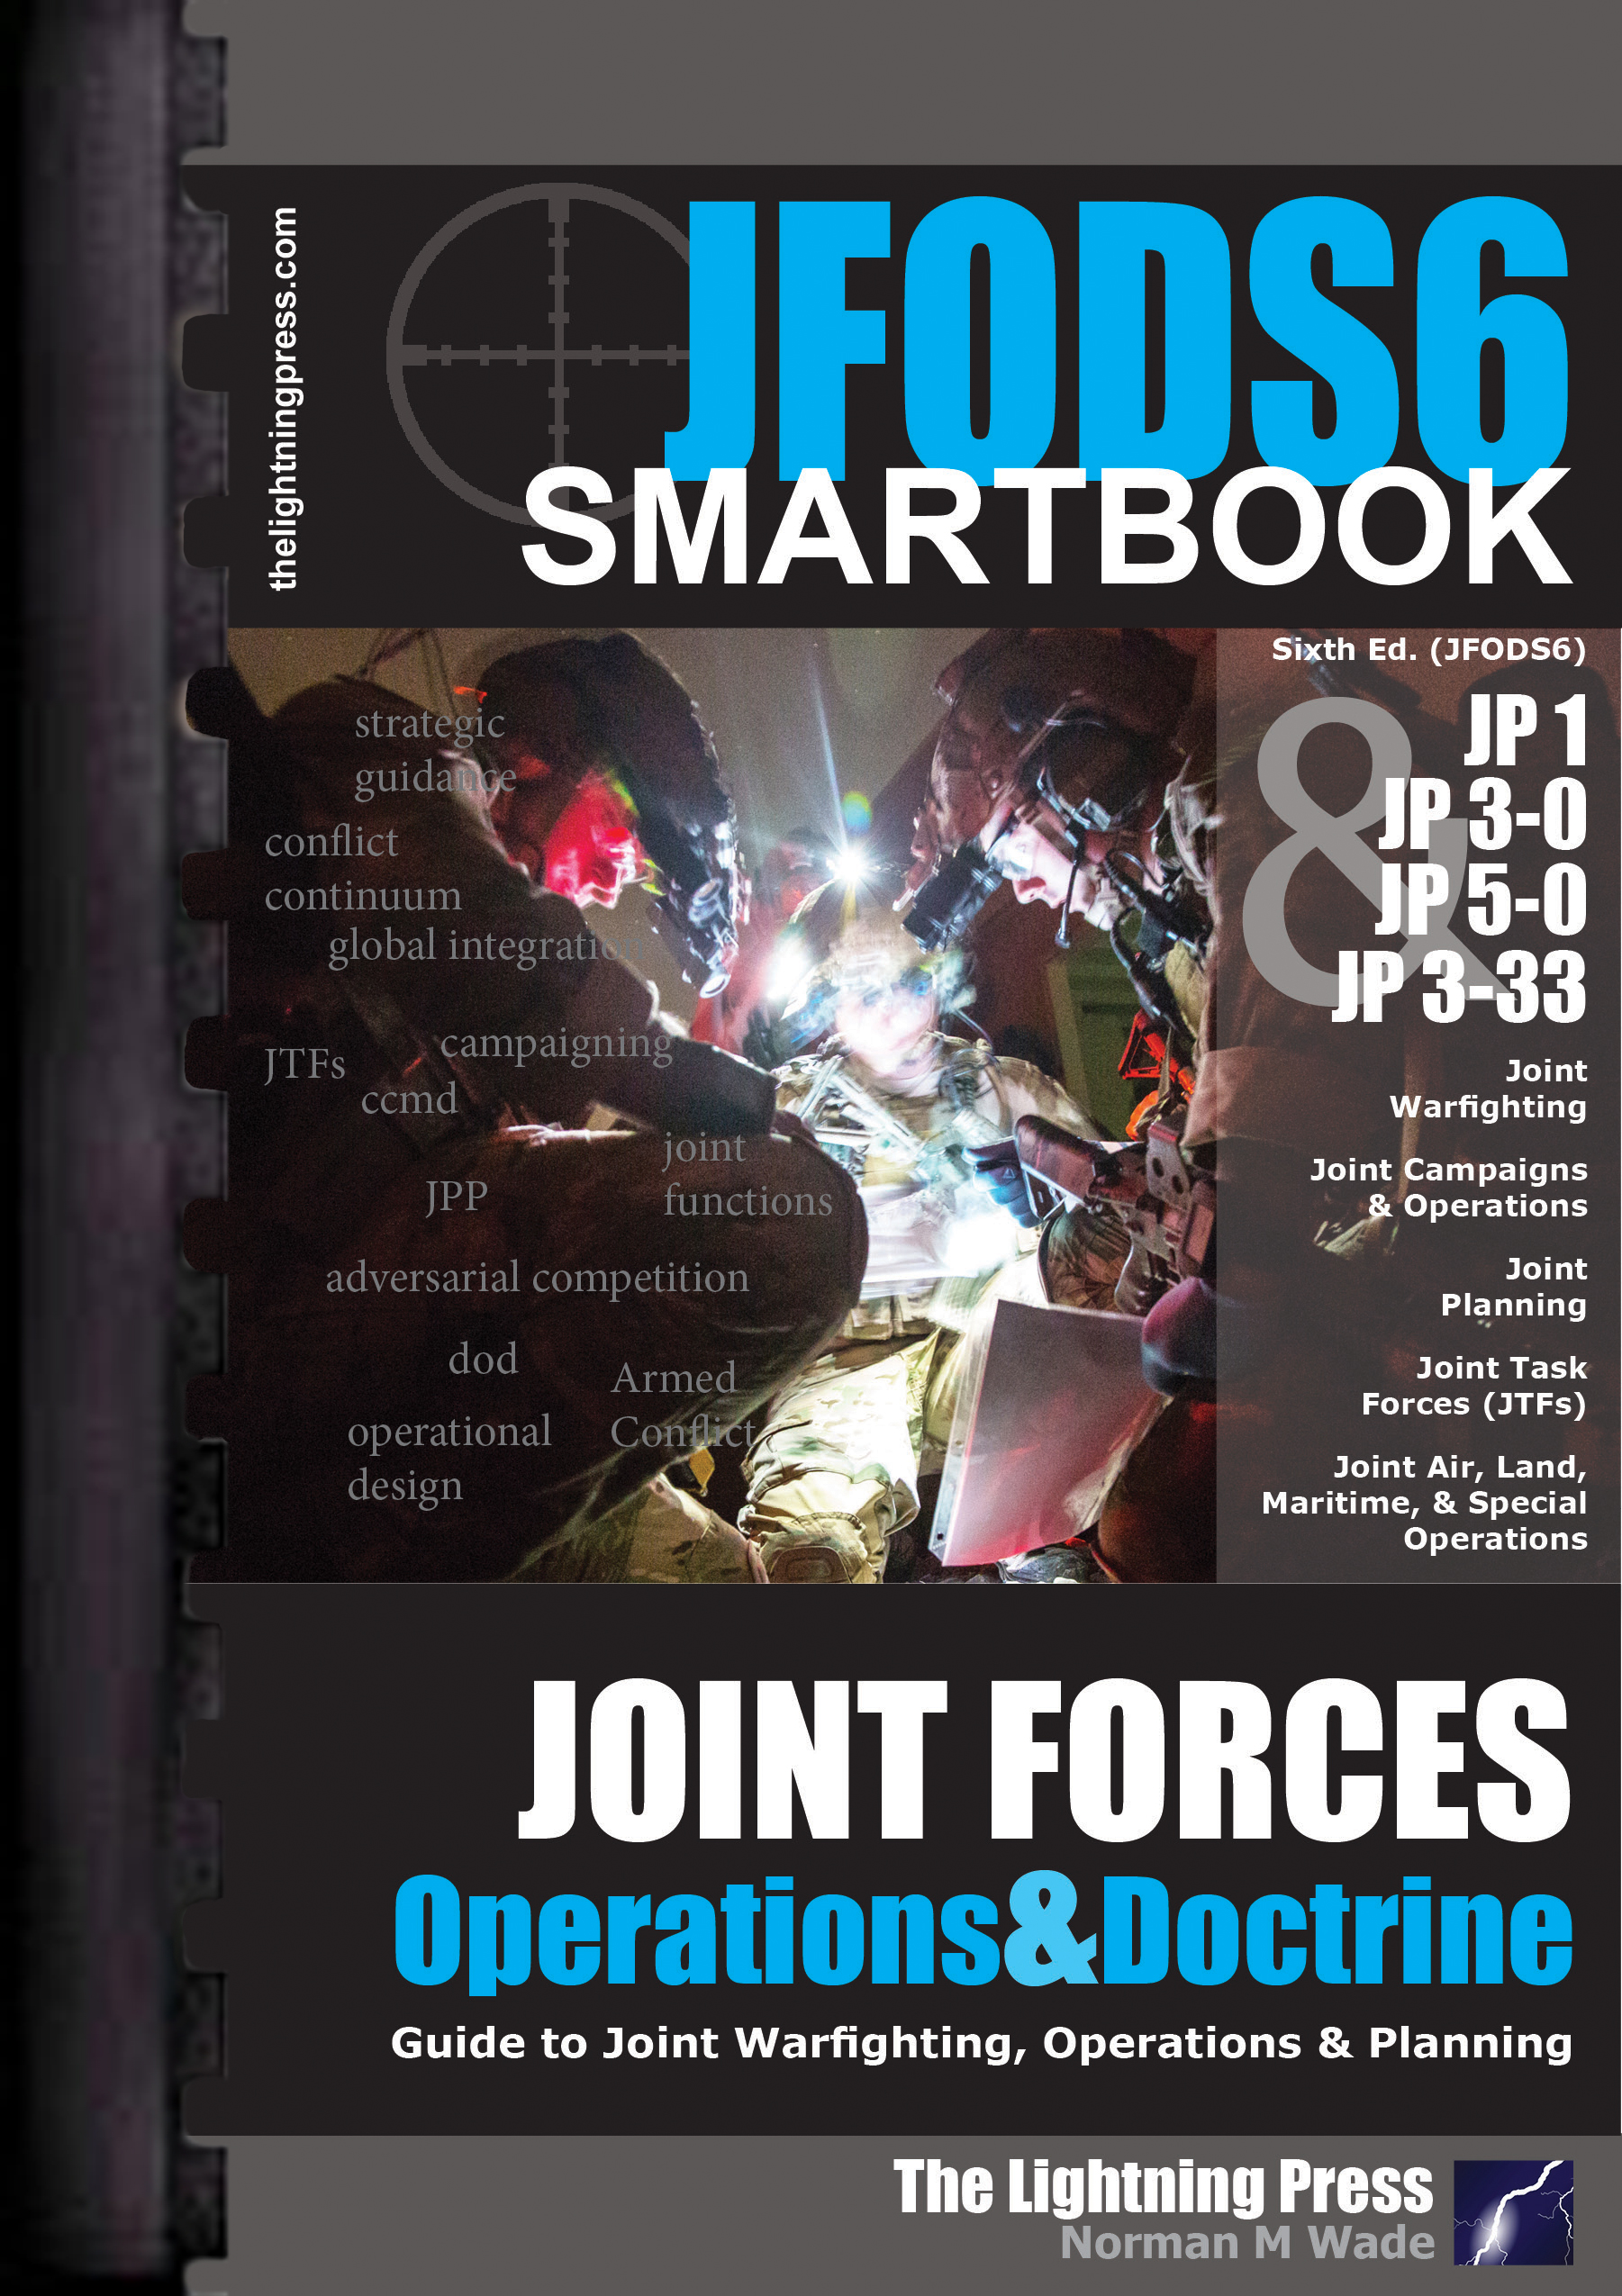 JFODS6: The Joint Forces Operations & Doctrine SMARTbook, 6th Ed.